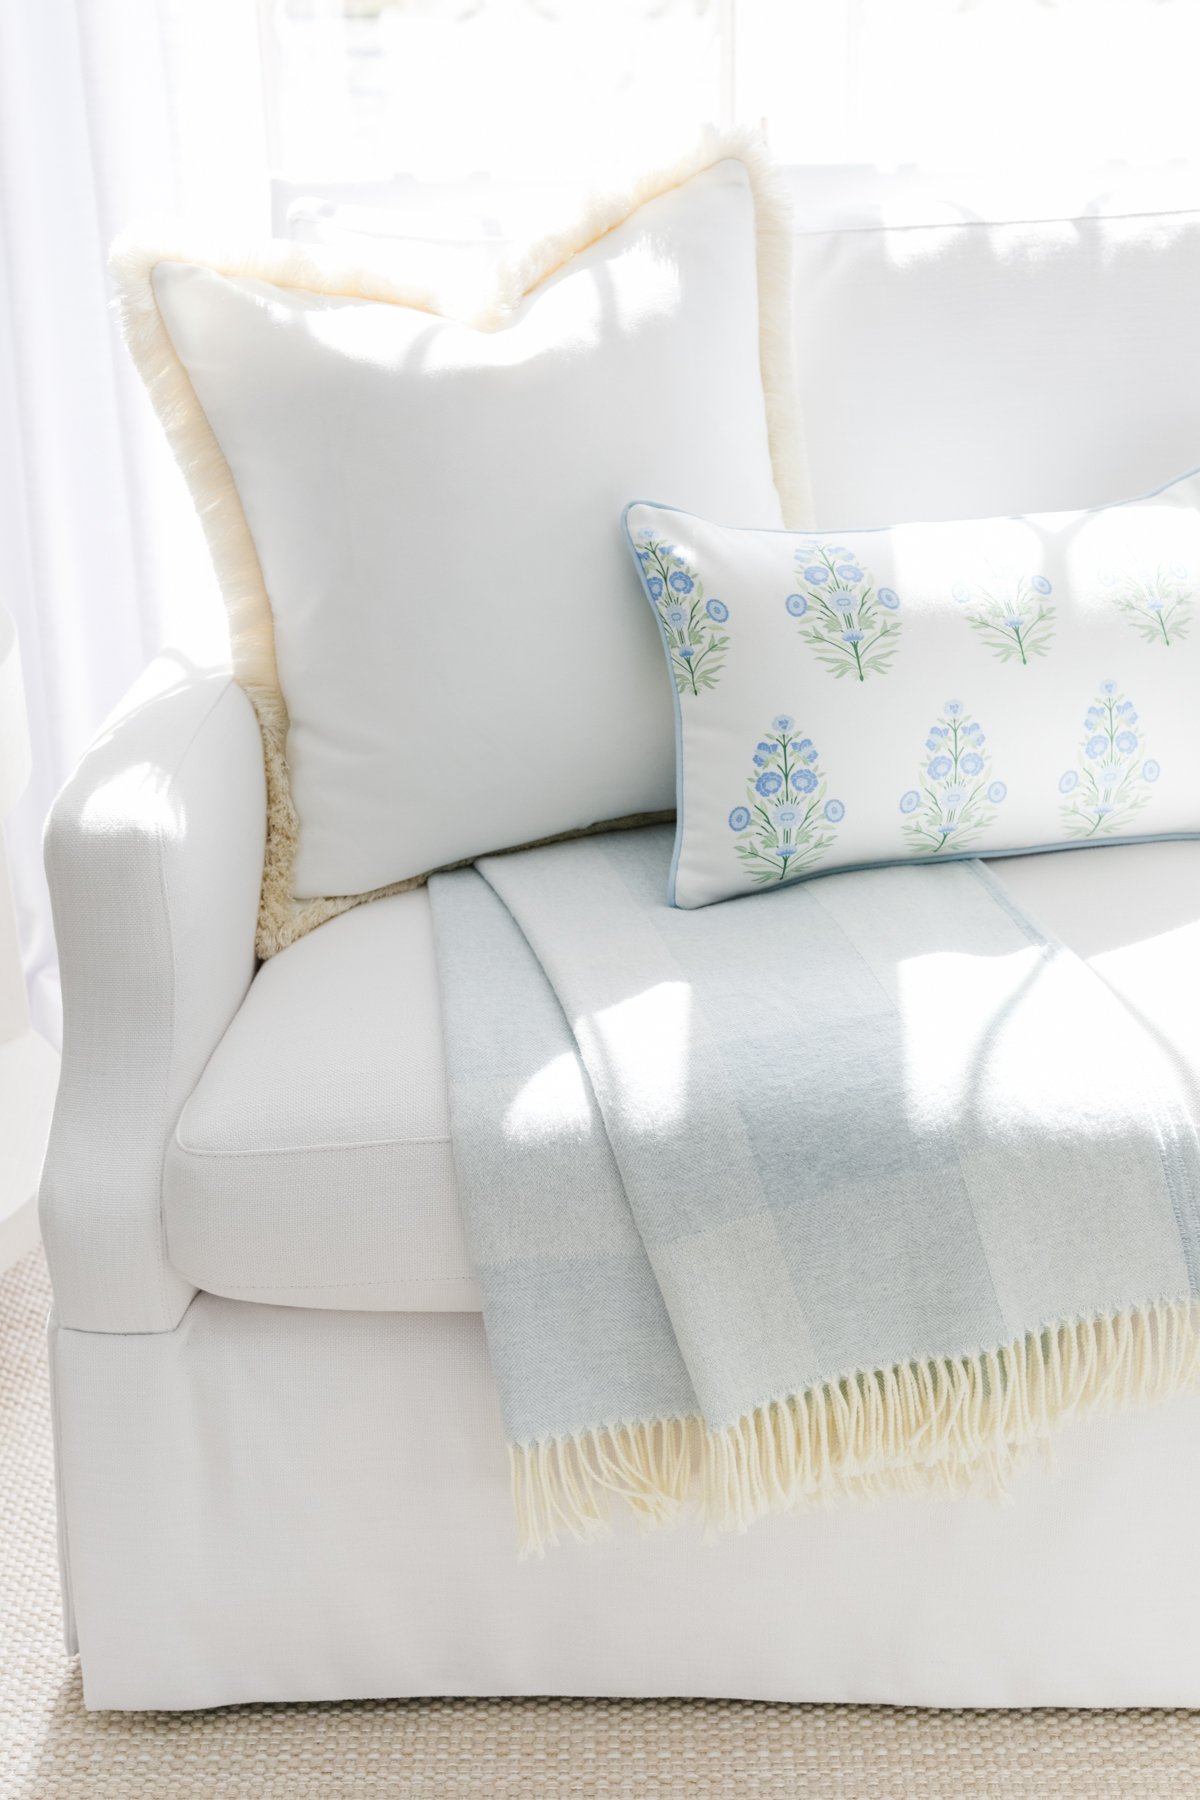 A white sofa with two decorative pillows and a blue and white fringed blanket draped over the armrest.